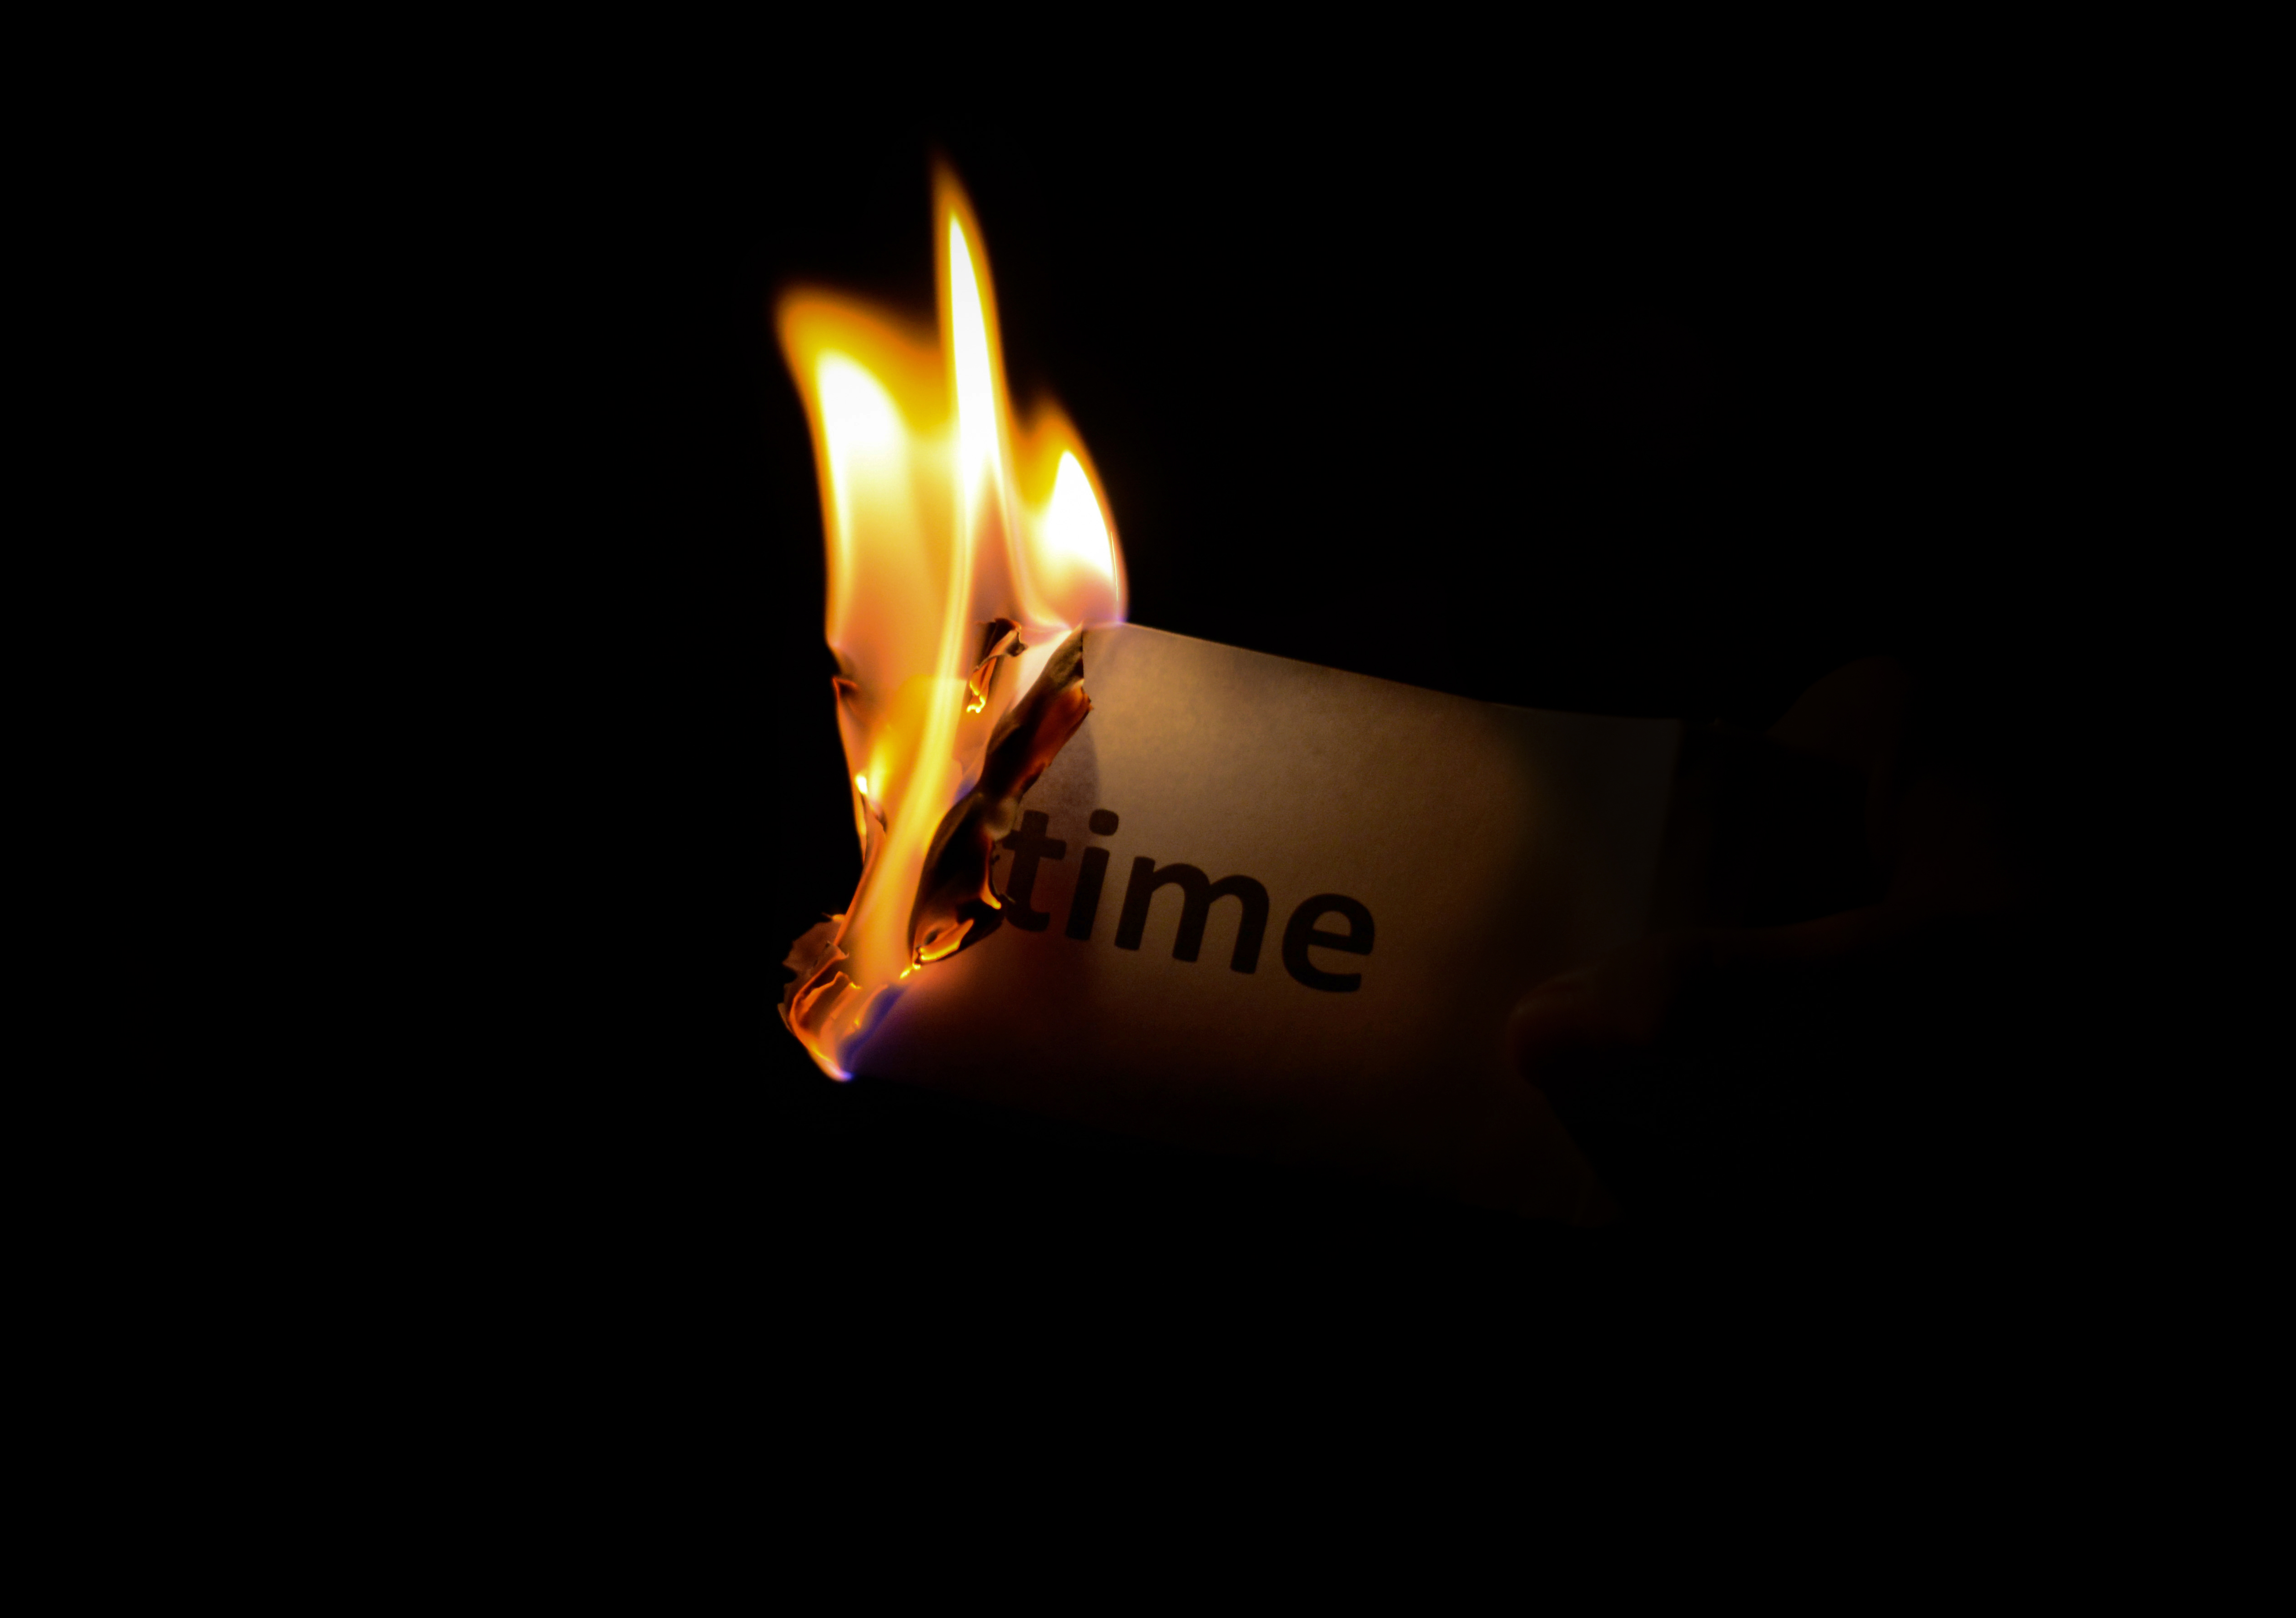 inspiration, words, it's time, time, fire